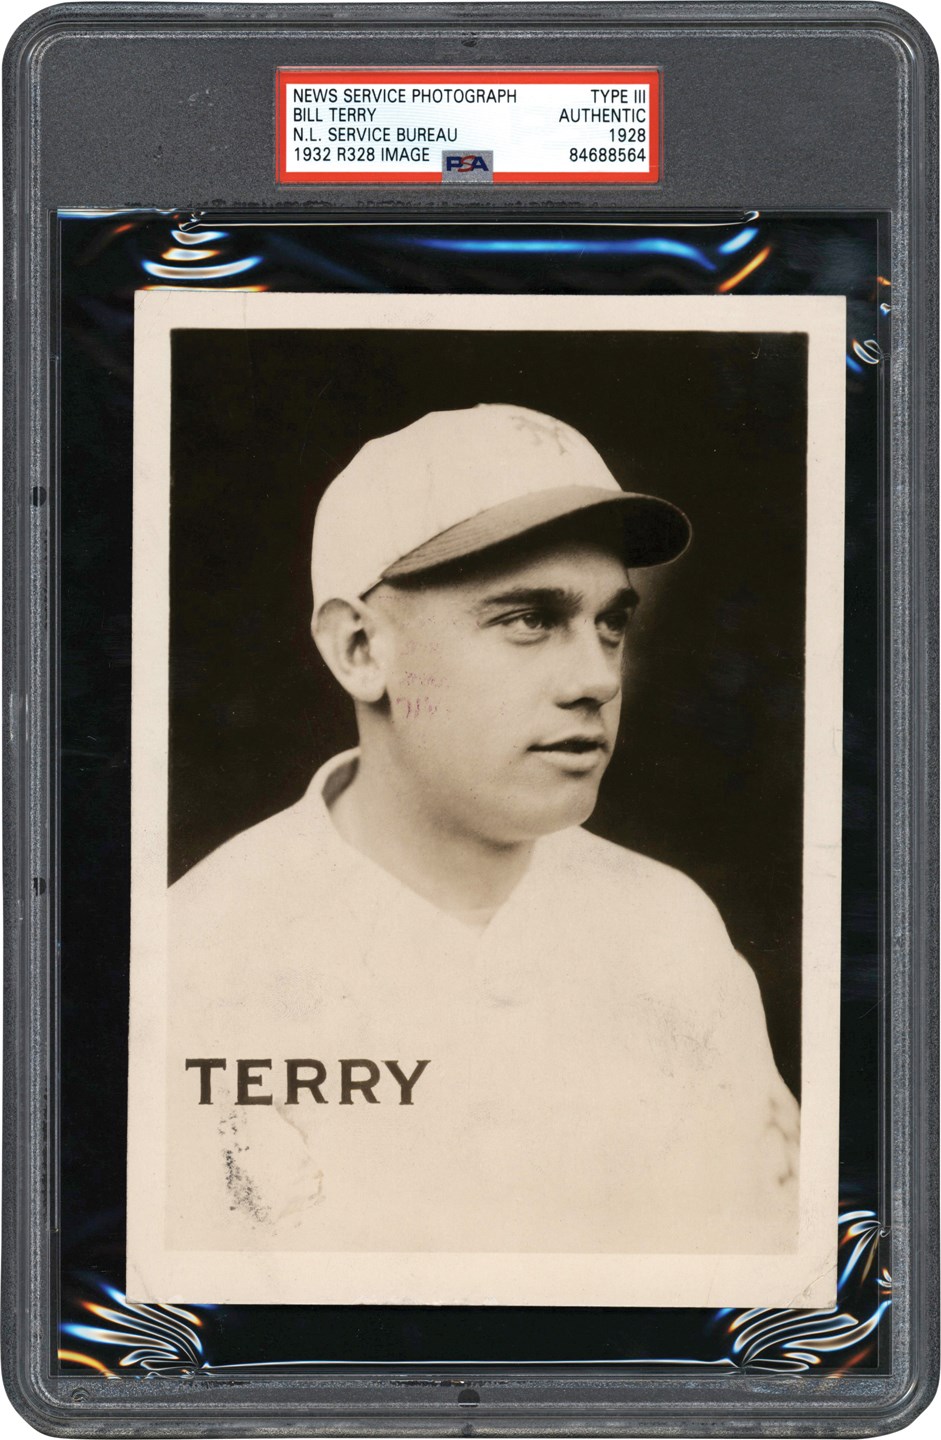 - 1928 Bill Terry Photograph Used for 1932 R328 U.S. Caramel Card (PSA Type III)